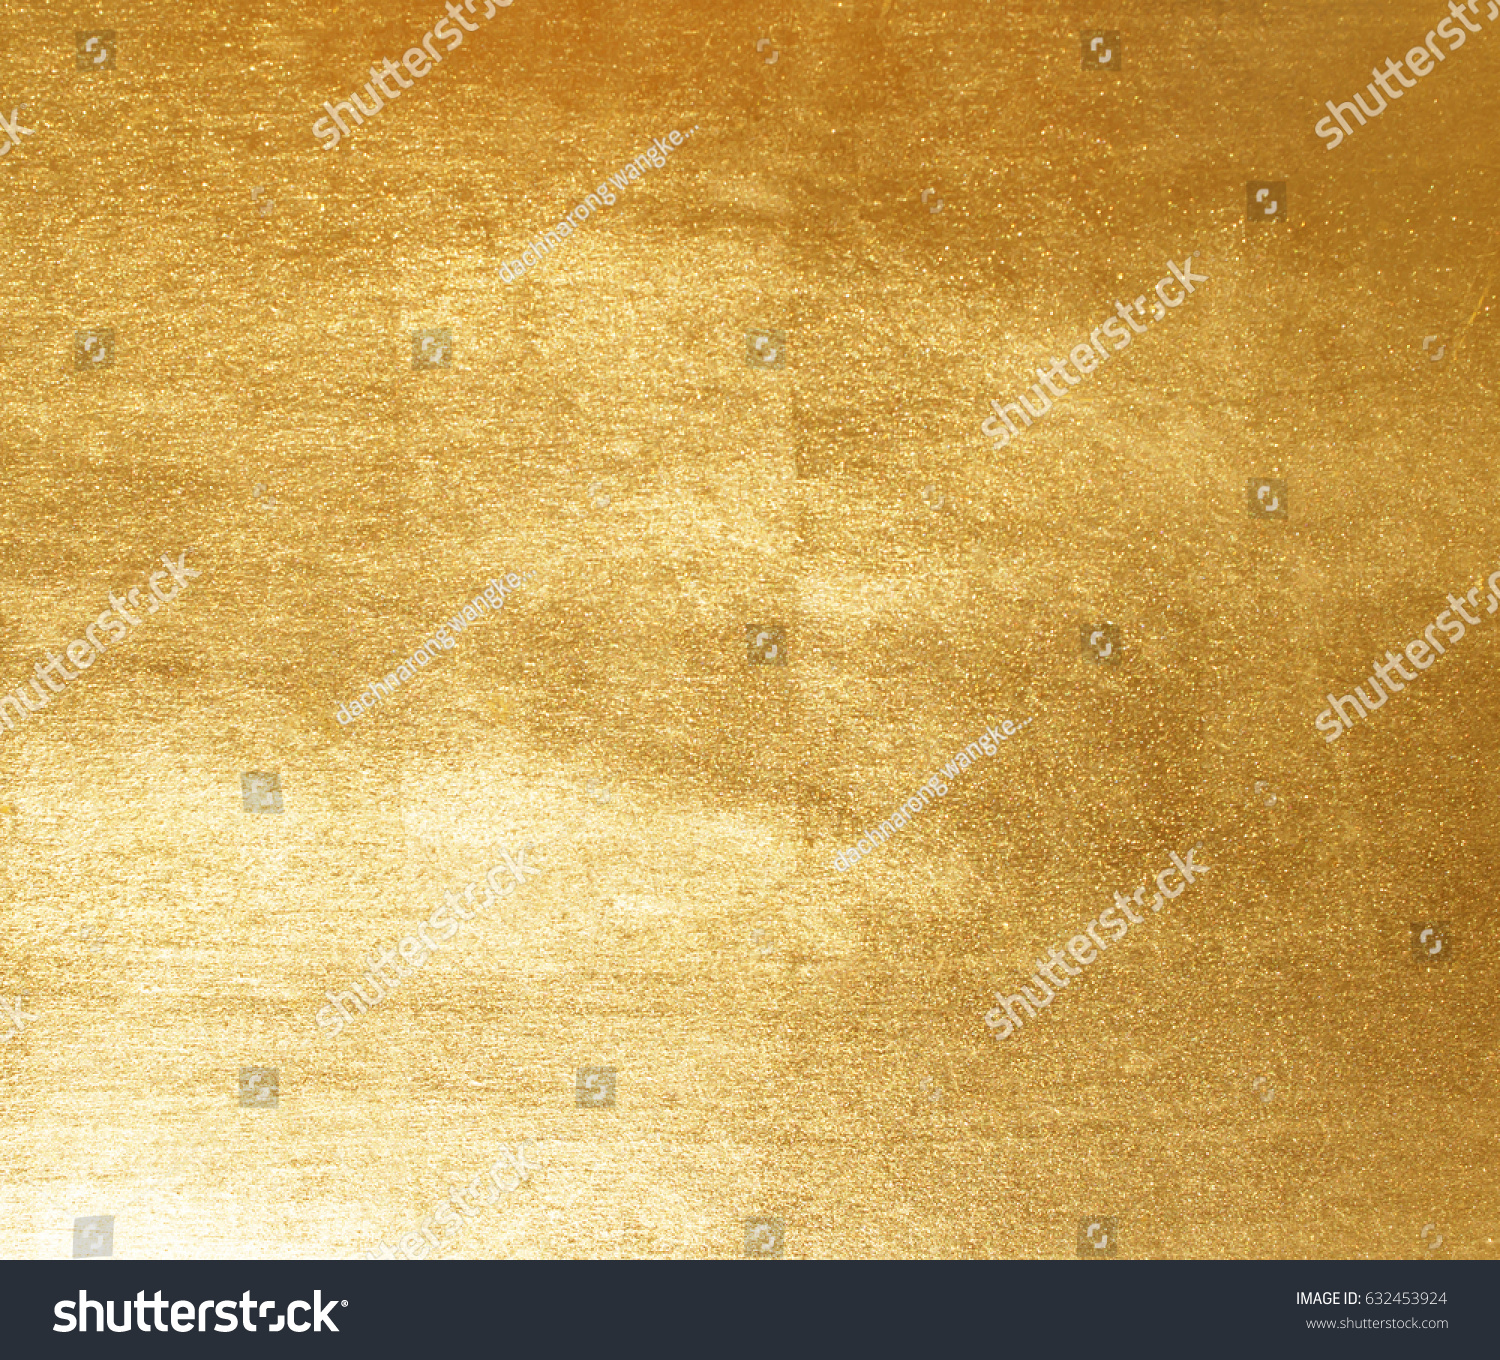 Shiny yellow leaf gold foil texture background #632453924